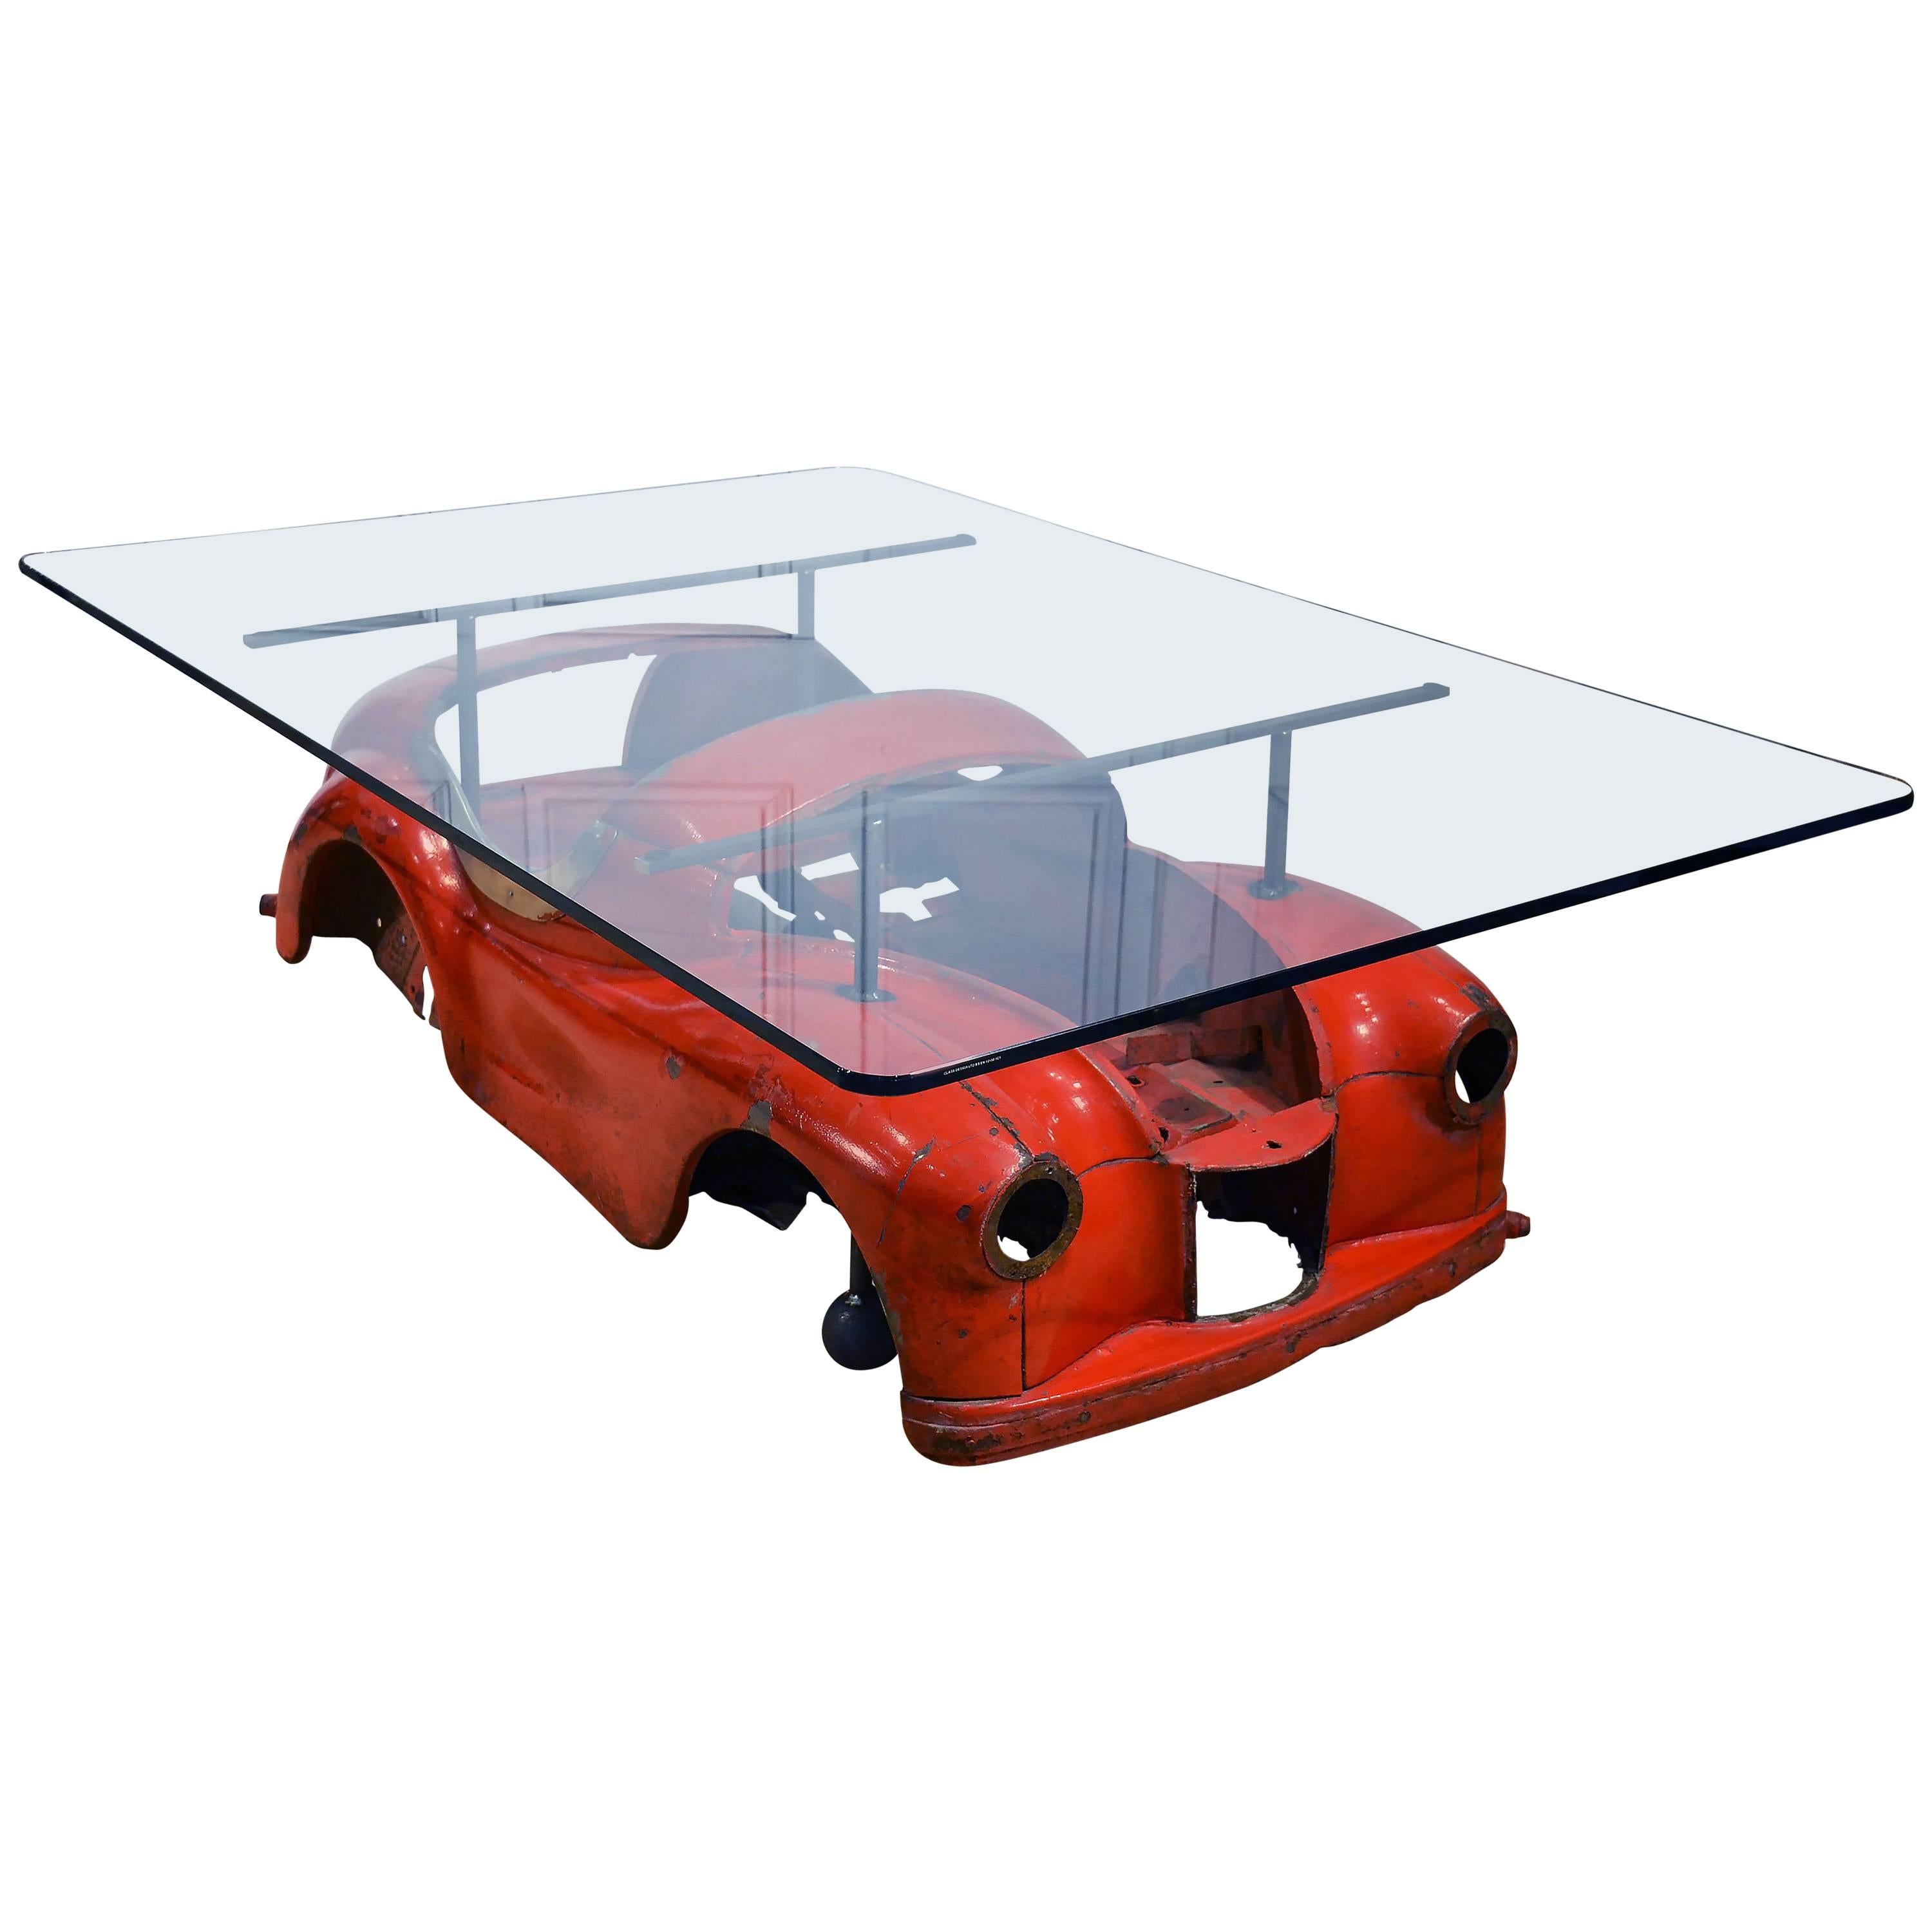 20th Century Industrial Coffee Table with Retro Toy Car Design